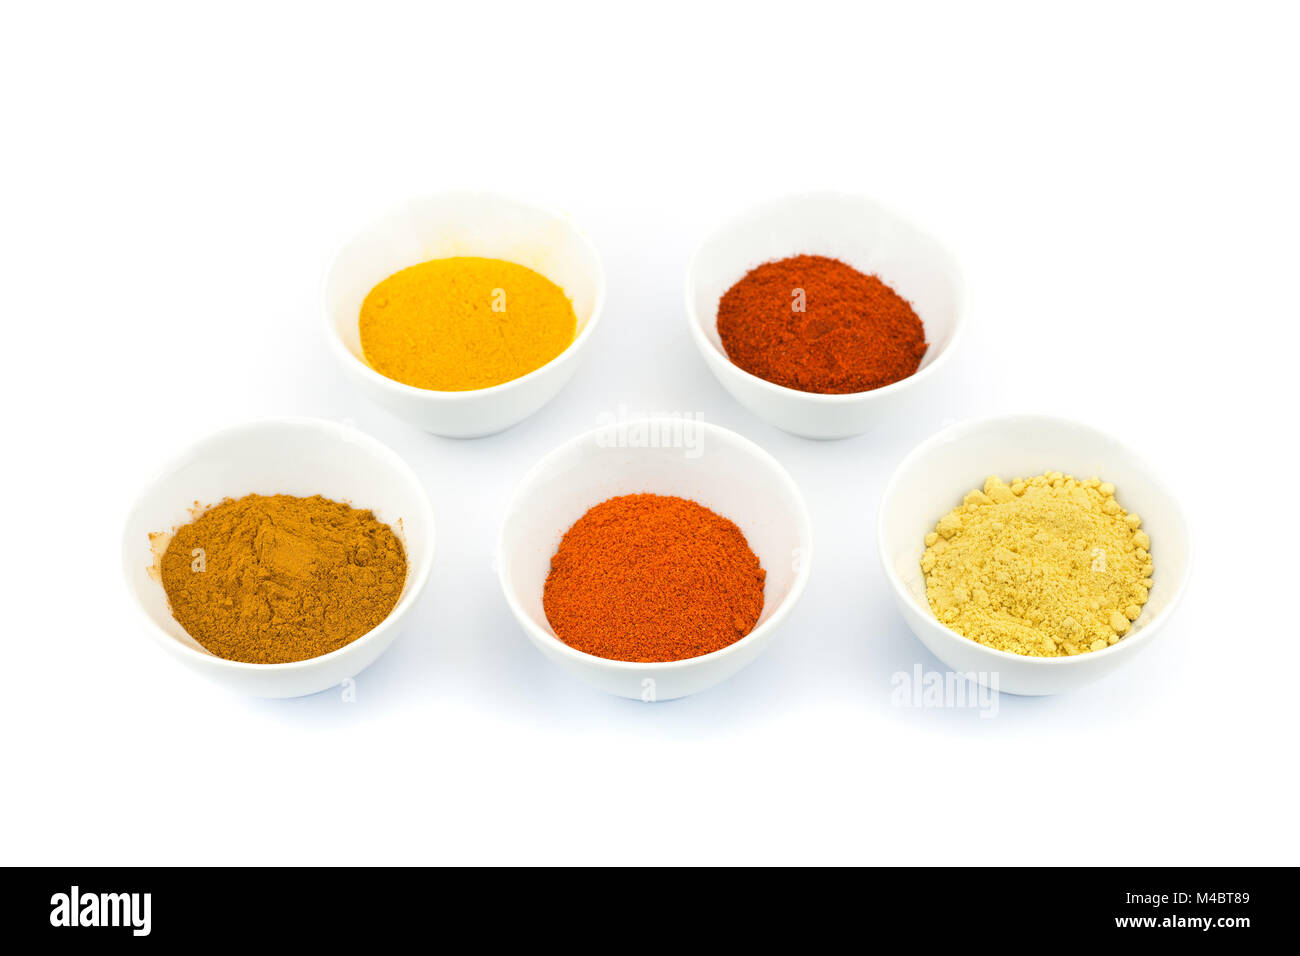 Porcelain bowls with several seasoning spices on white background Stock Photo